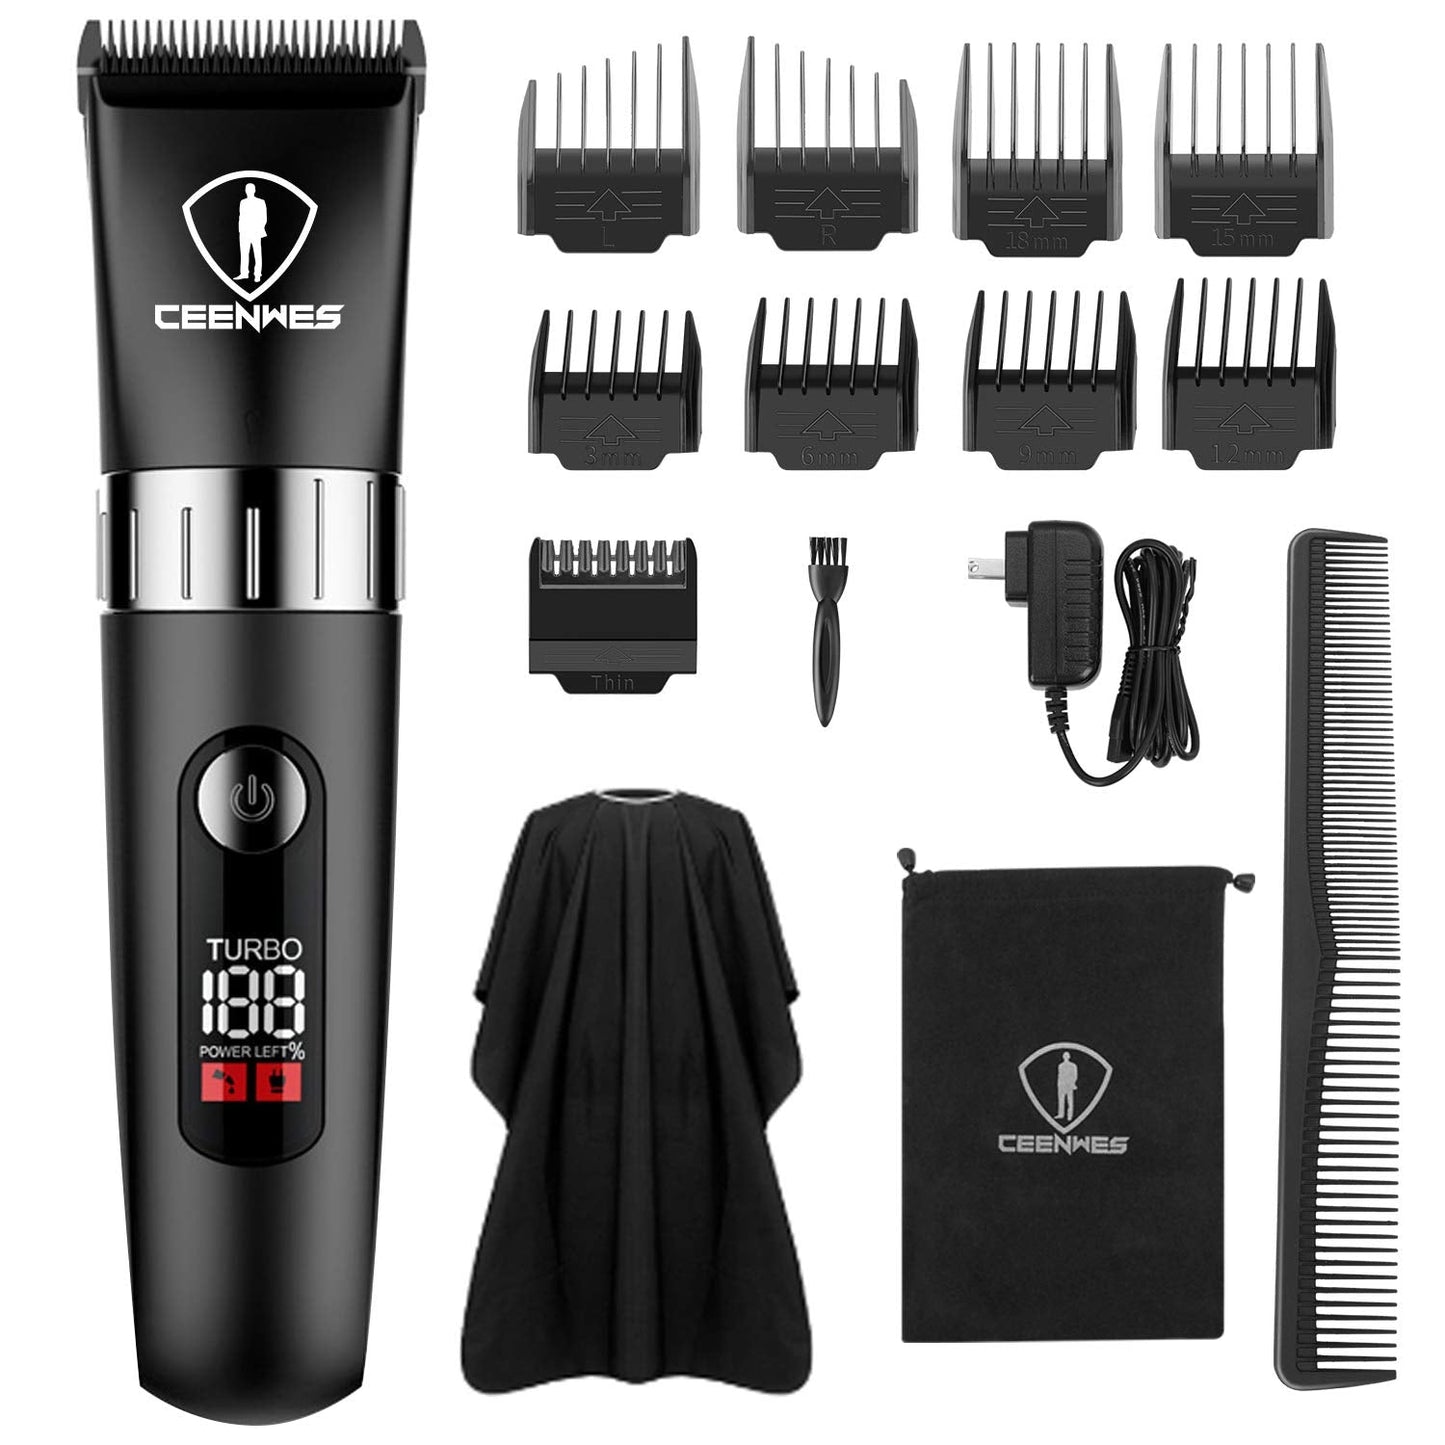 Ceenwes Quiet Hair Clippers for Men, Cordless Hair Trimmer Beard Trimmer Men Haircut Kit Rechargeable Waterproof with LED Display for Families - Home Decor Gifts and More